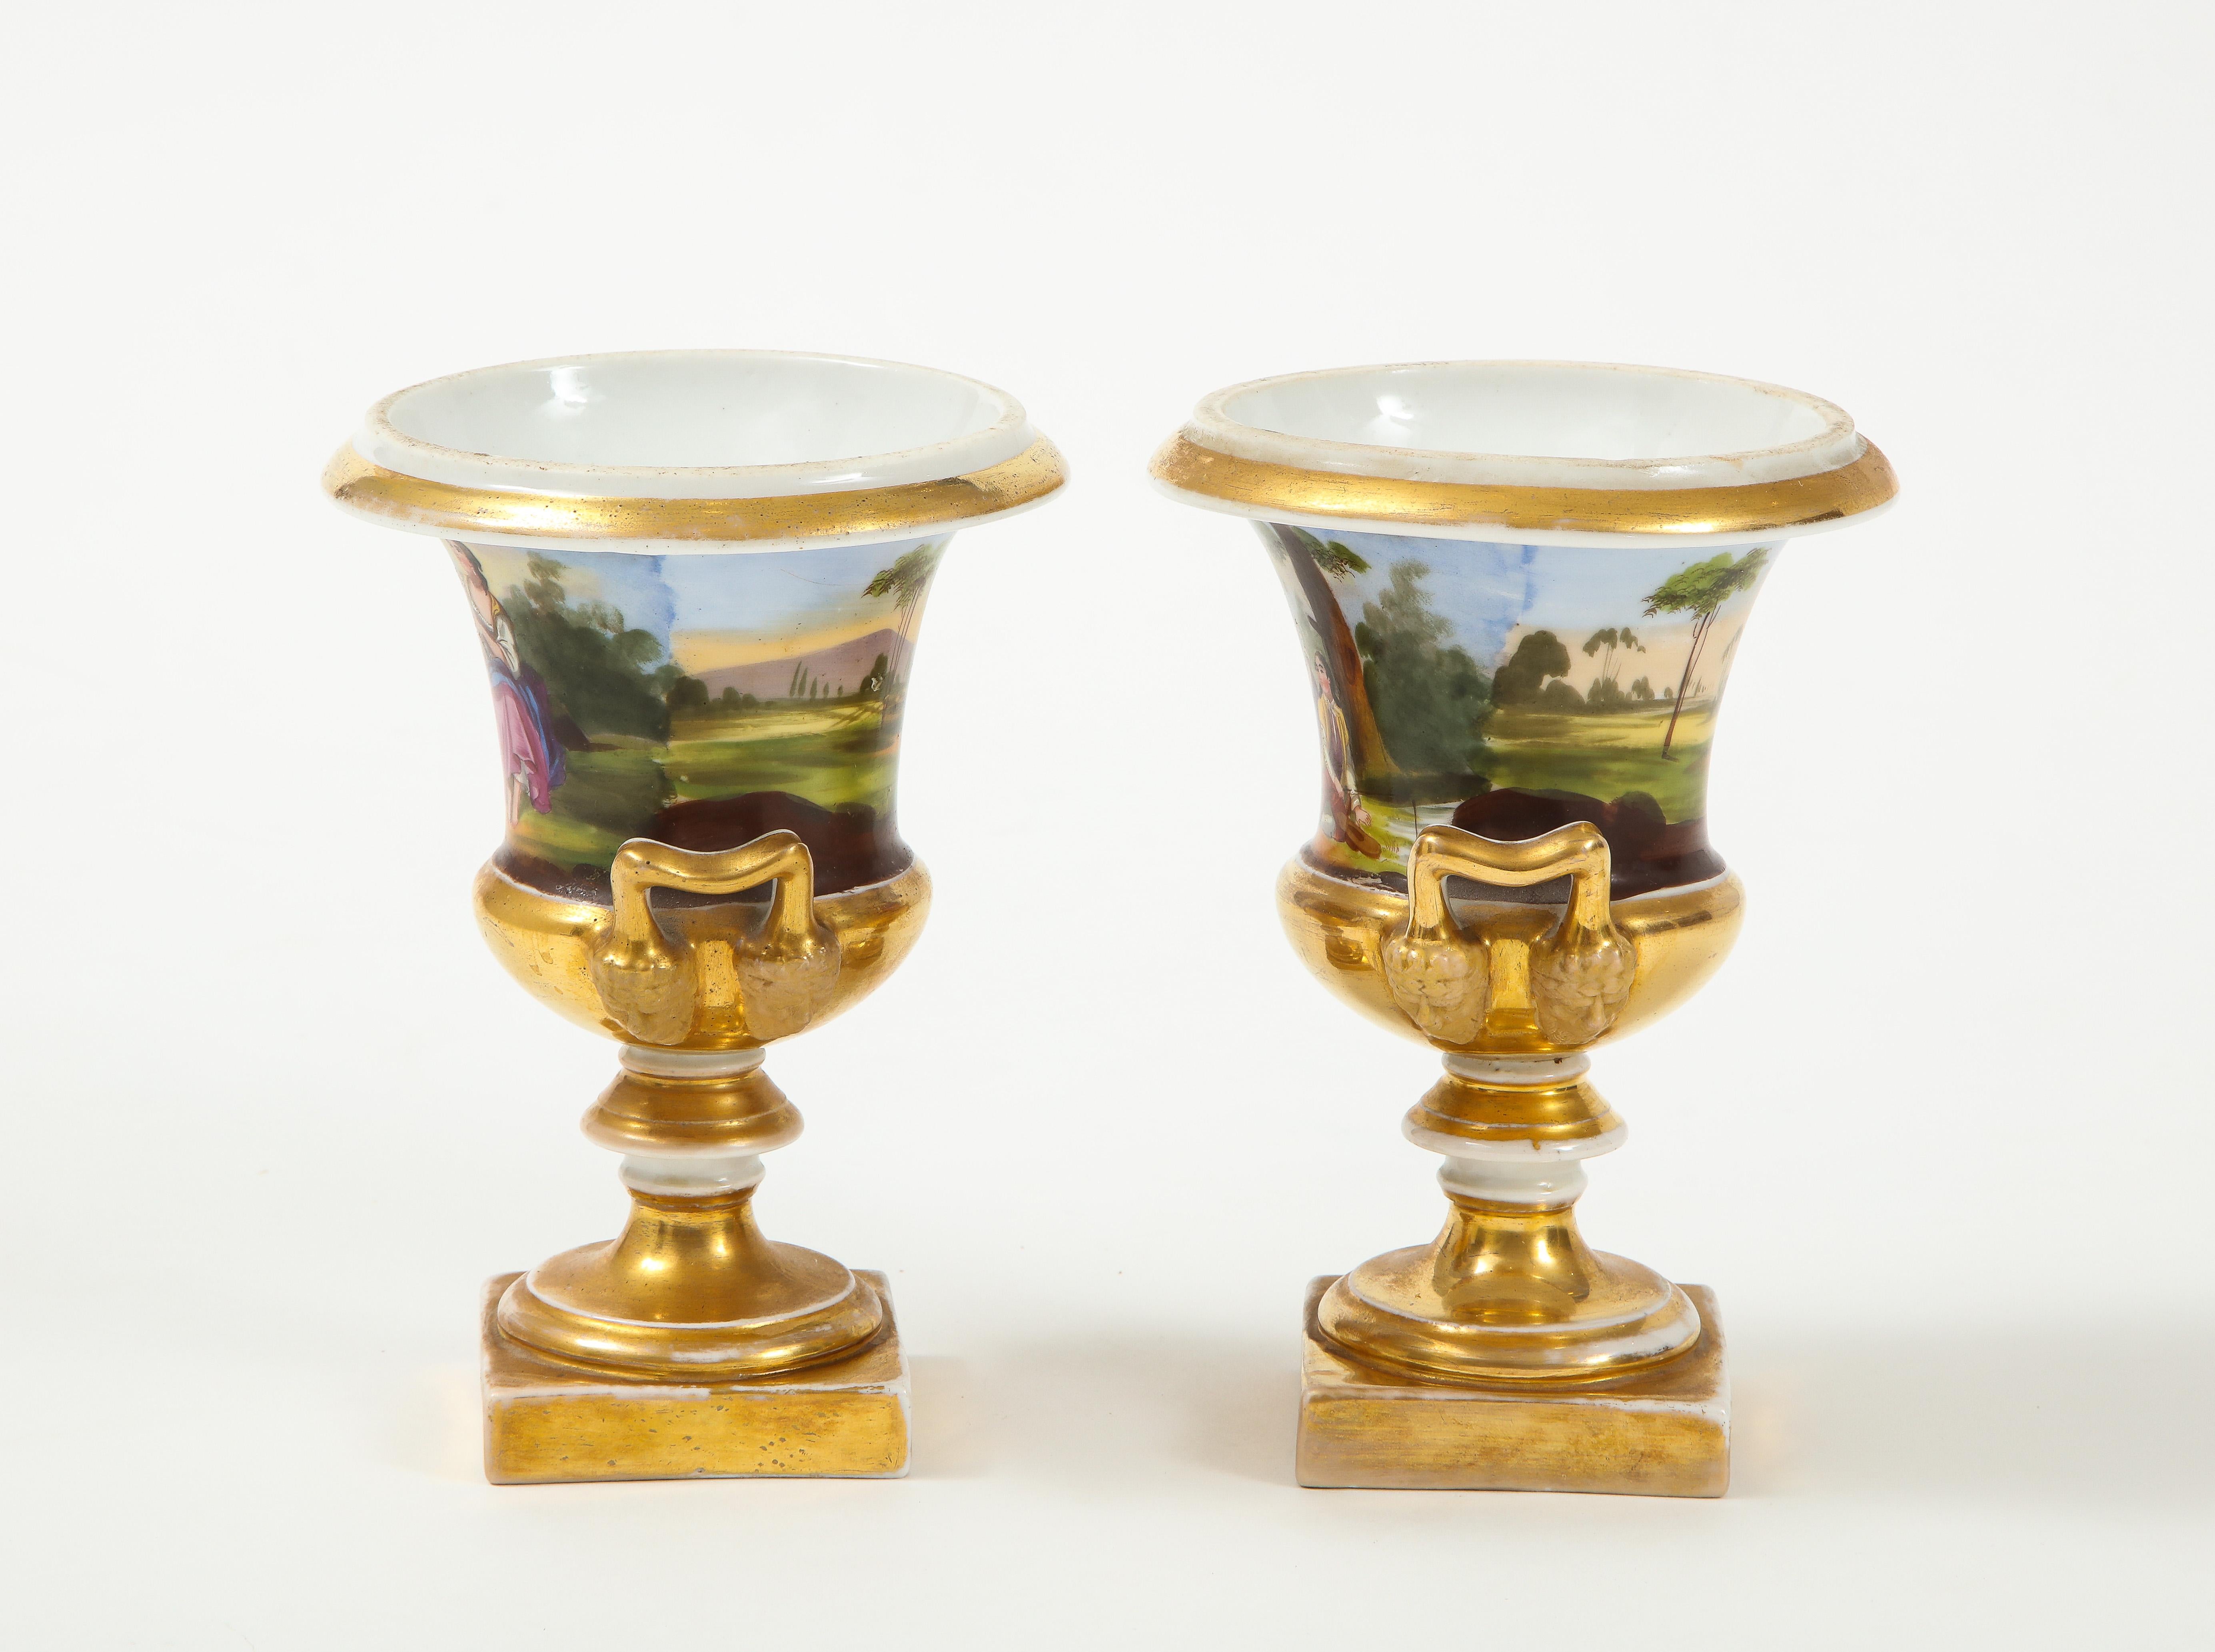 Pair of Hand Painted Porcelain Cache Pots For Sale at 1stDibs